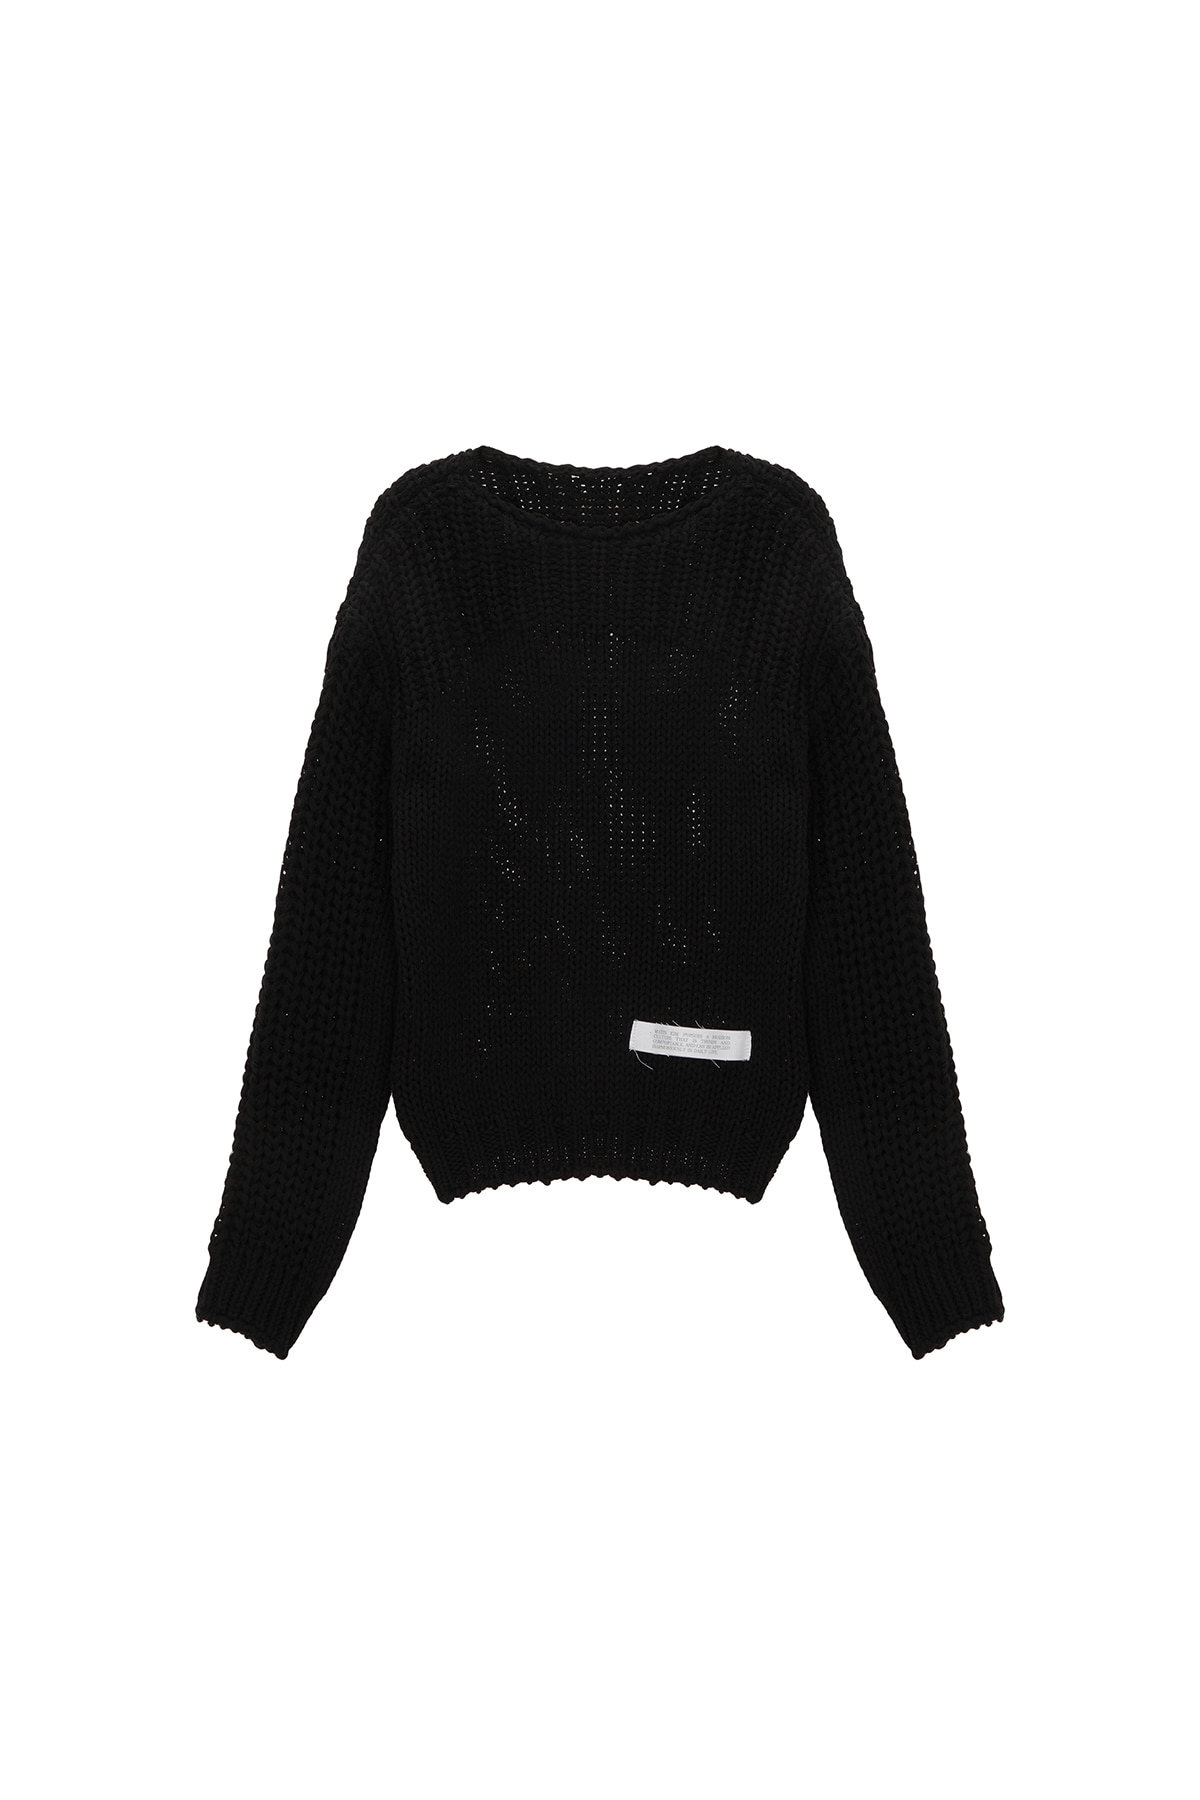 BRAID TEXTURE KNIT PULLOVER IN BLACK